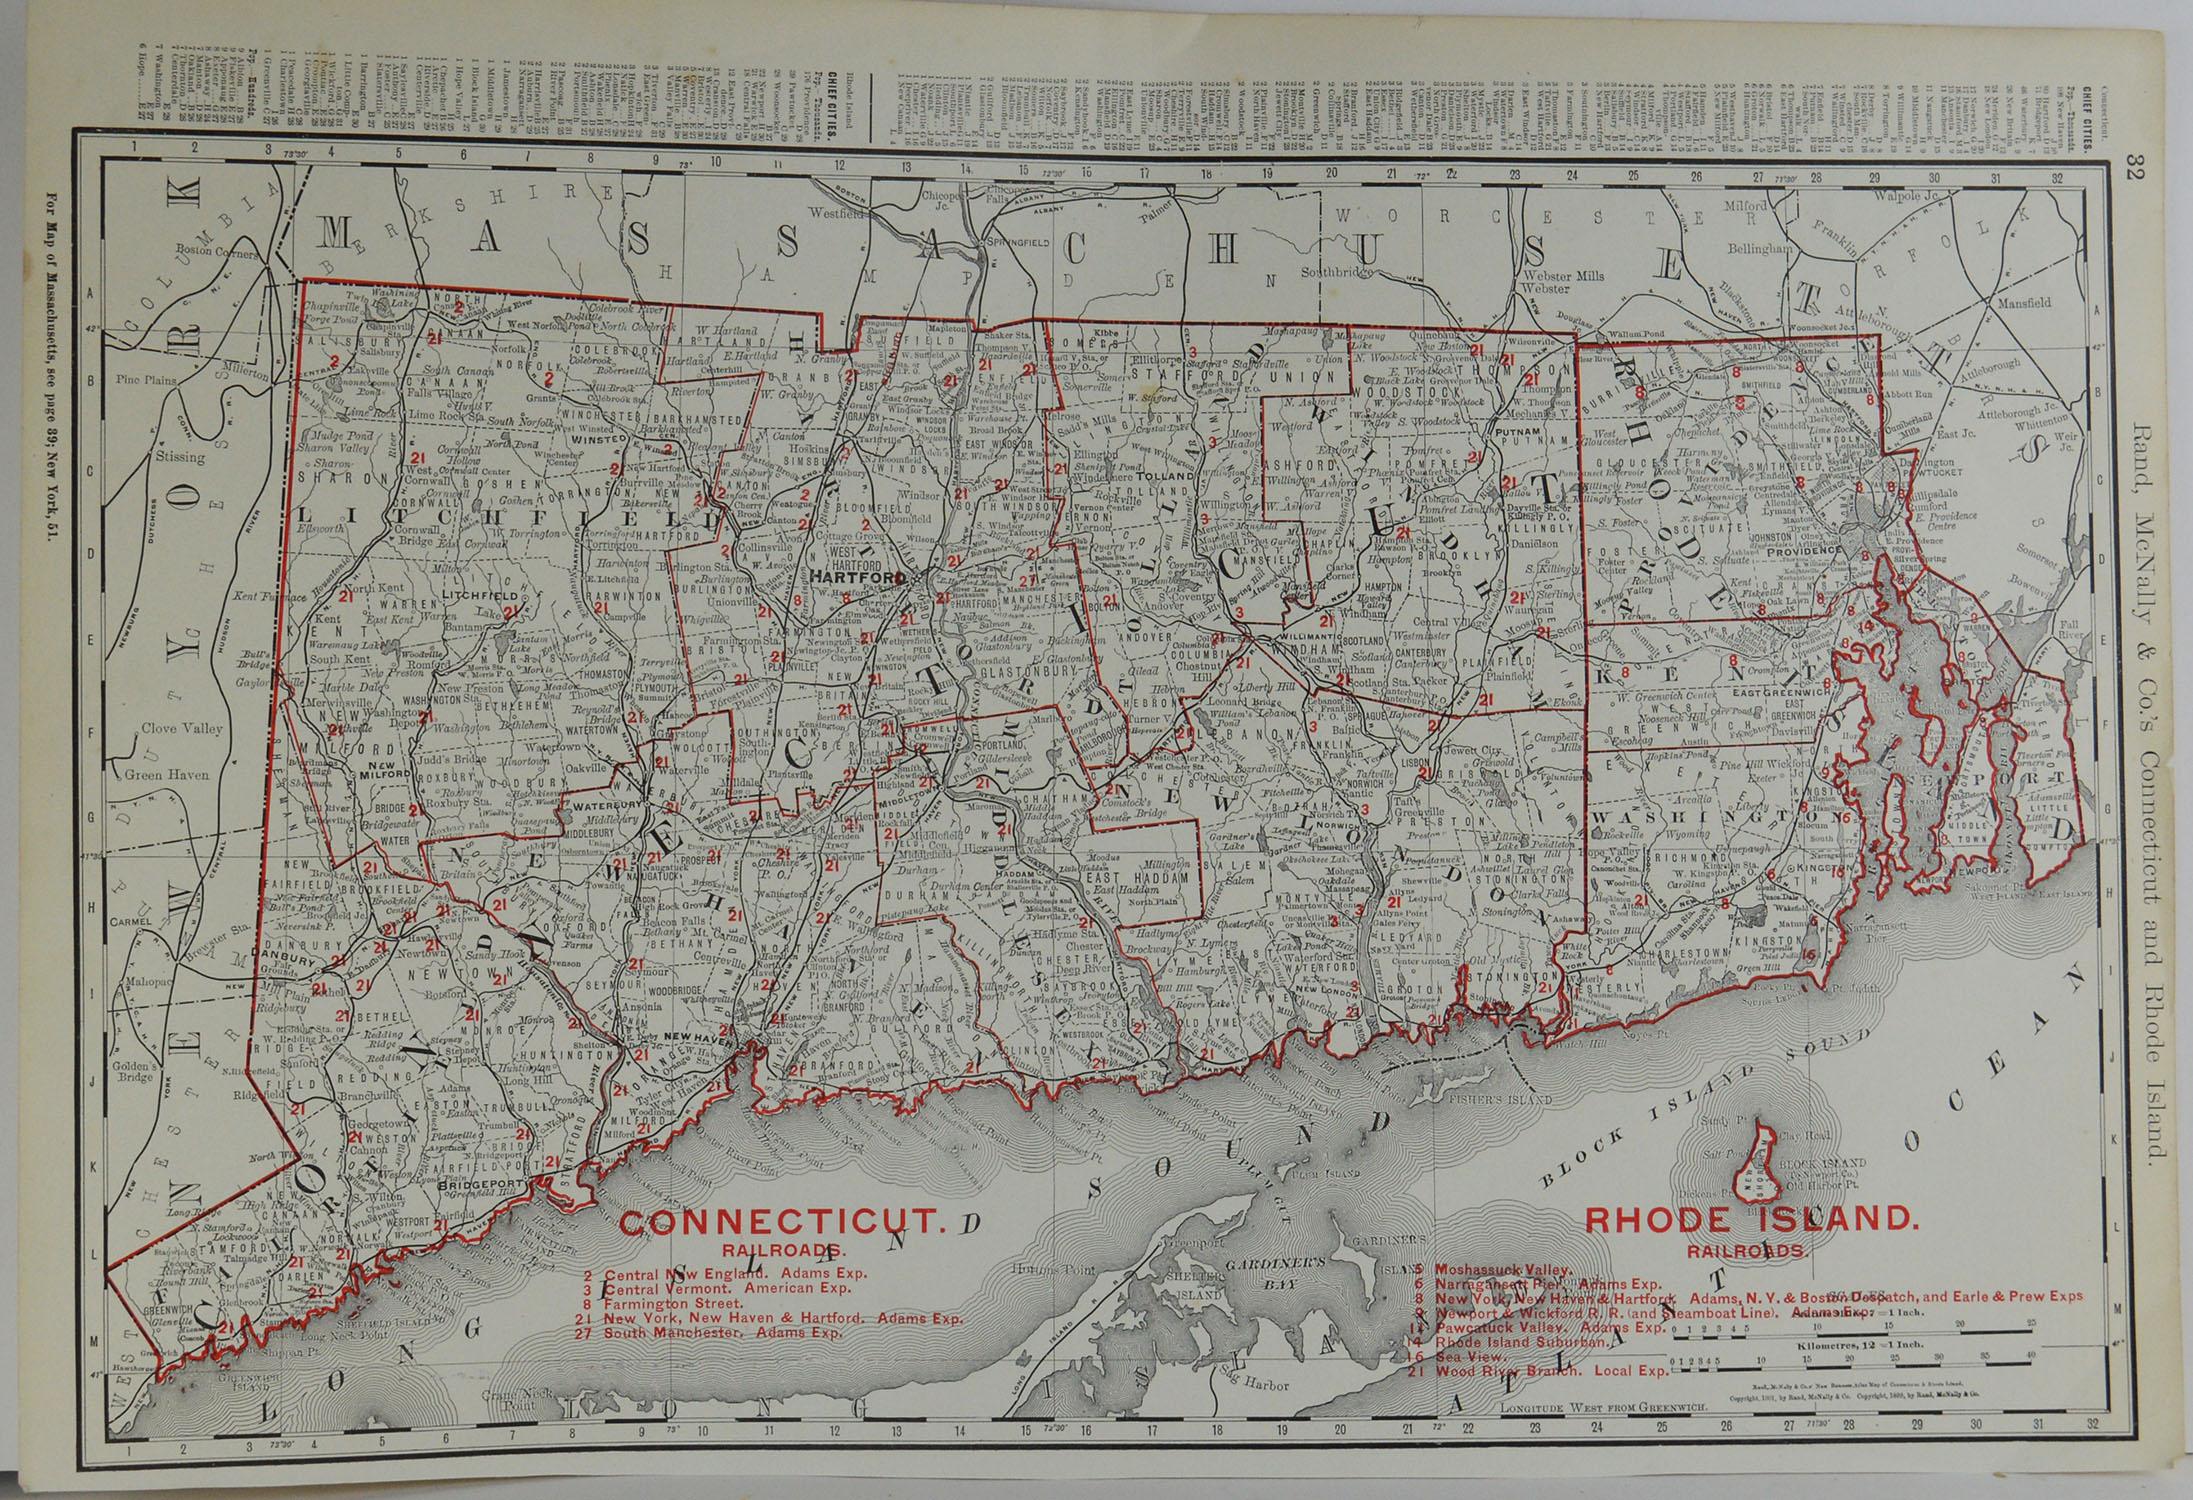 Fabulous monochrome map with red outline color

Original color

By Rand, McNally & Co.

Published, circa 1900

Unframed.

 